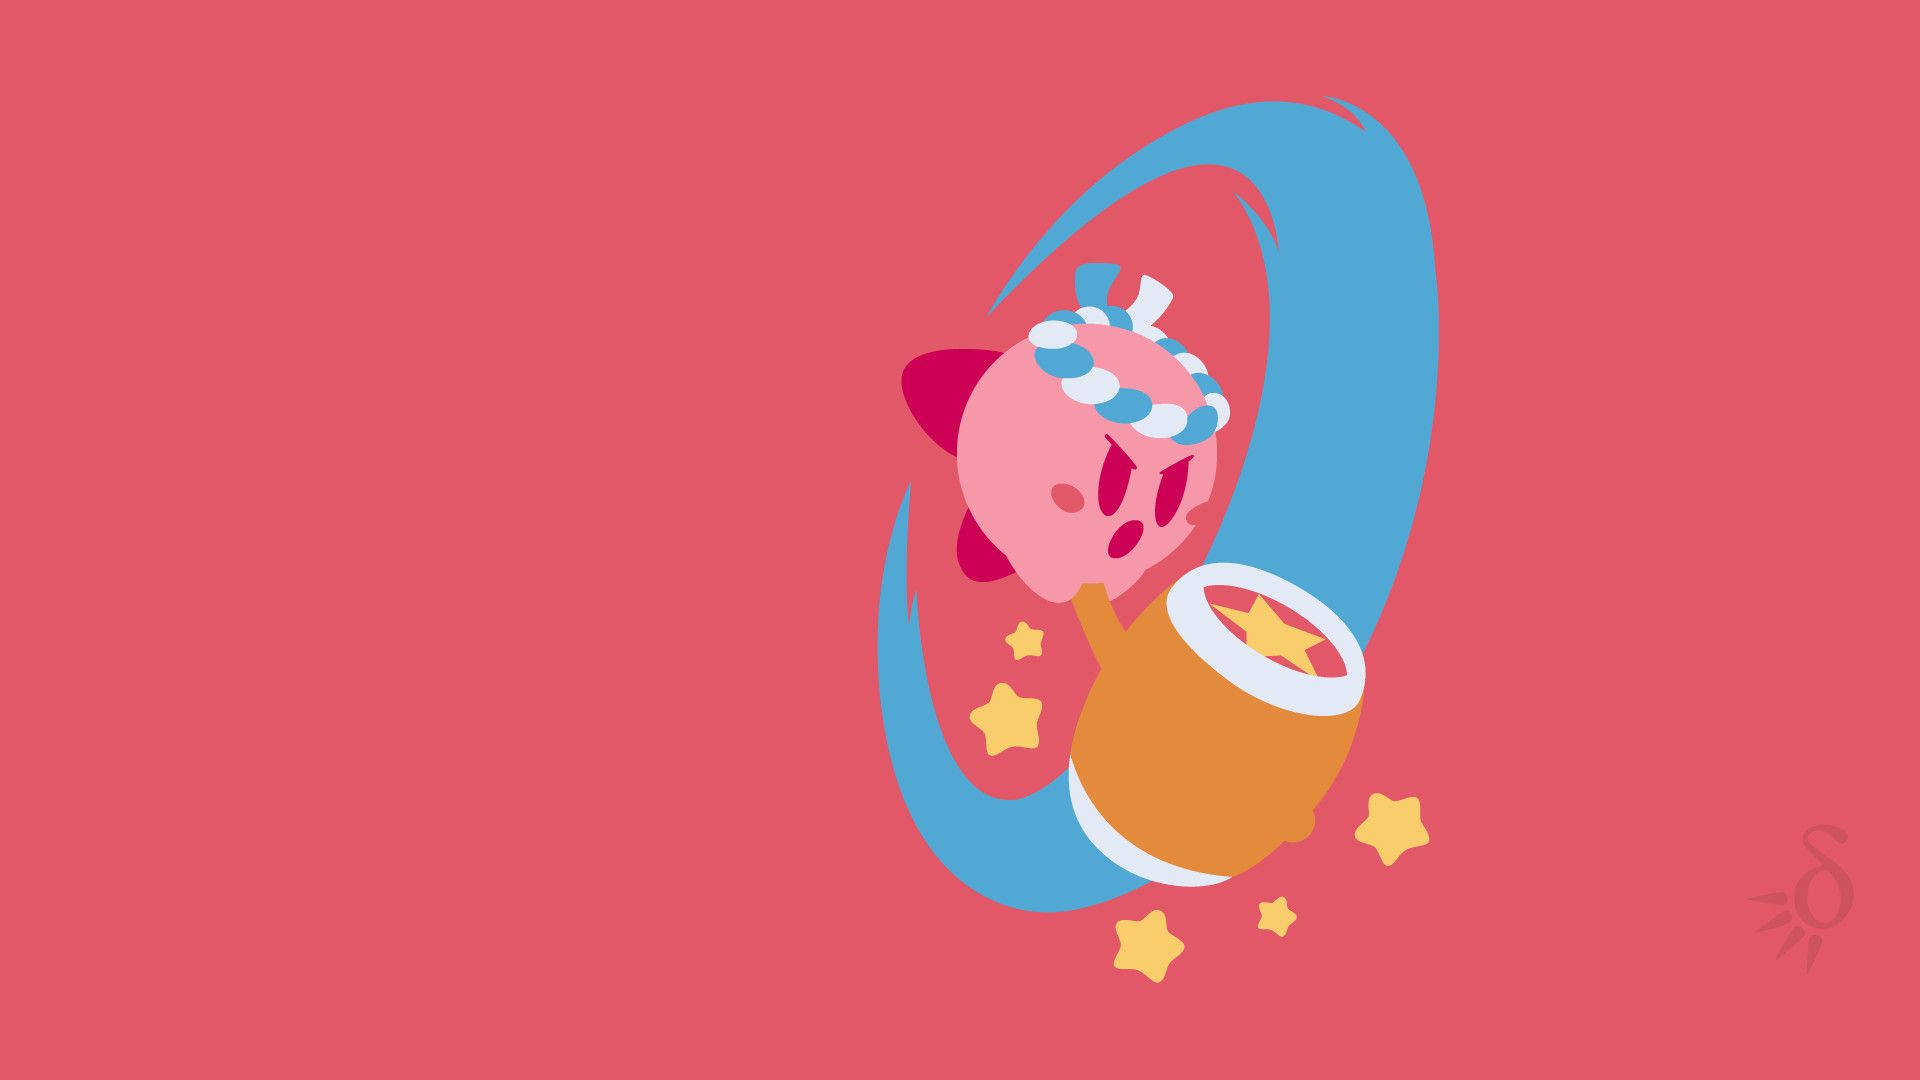 Awesome Pink Aesthetic Kirby Art